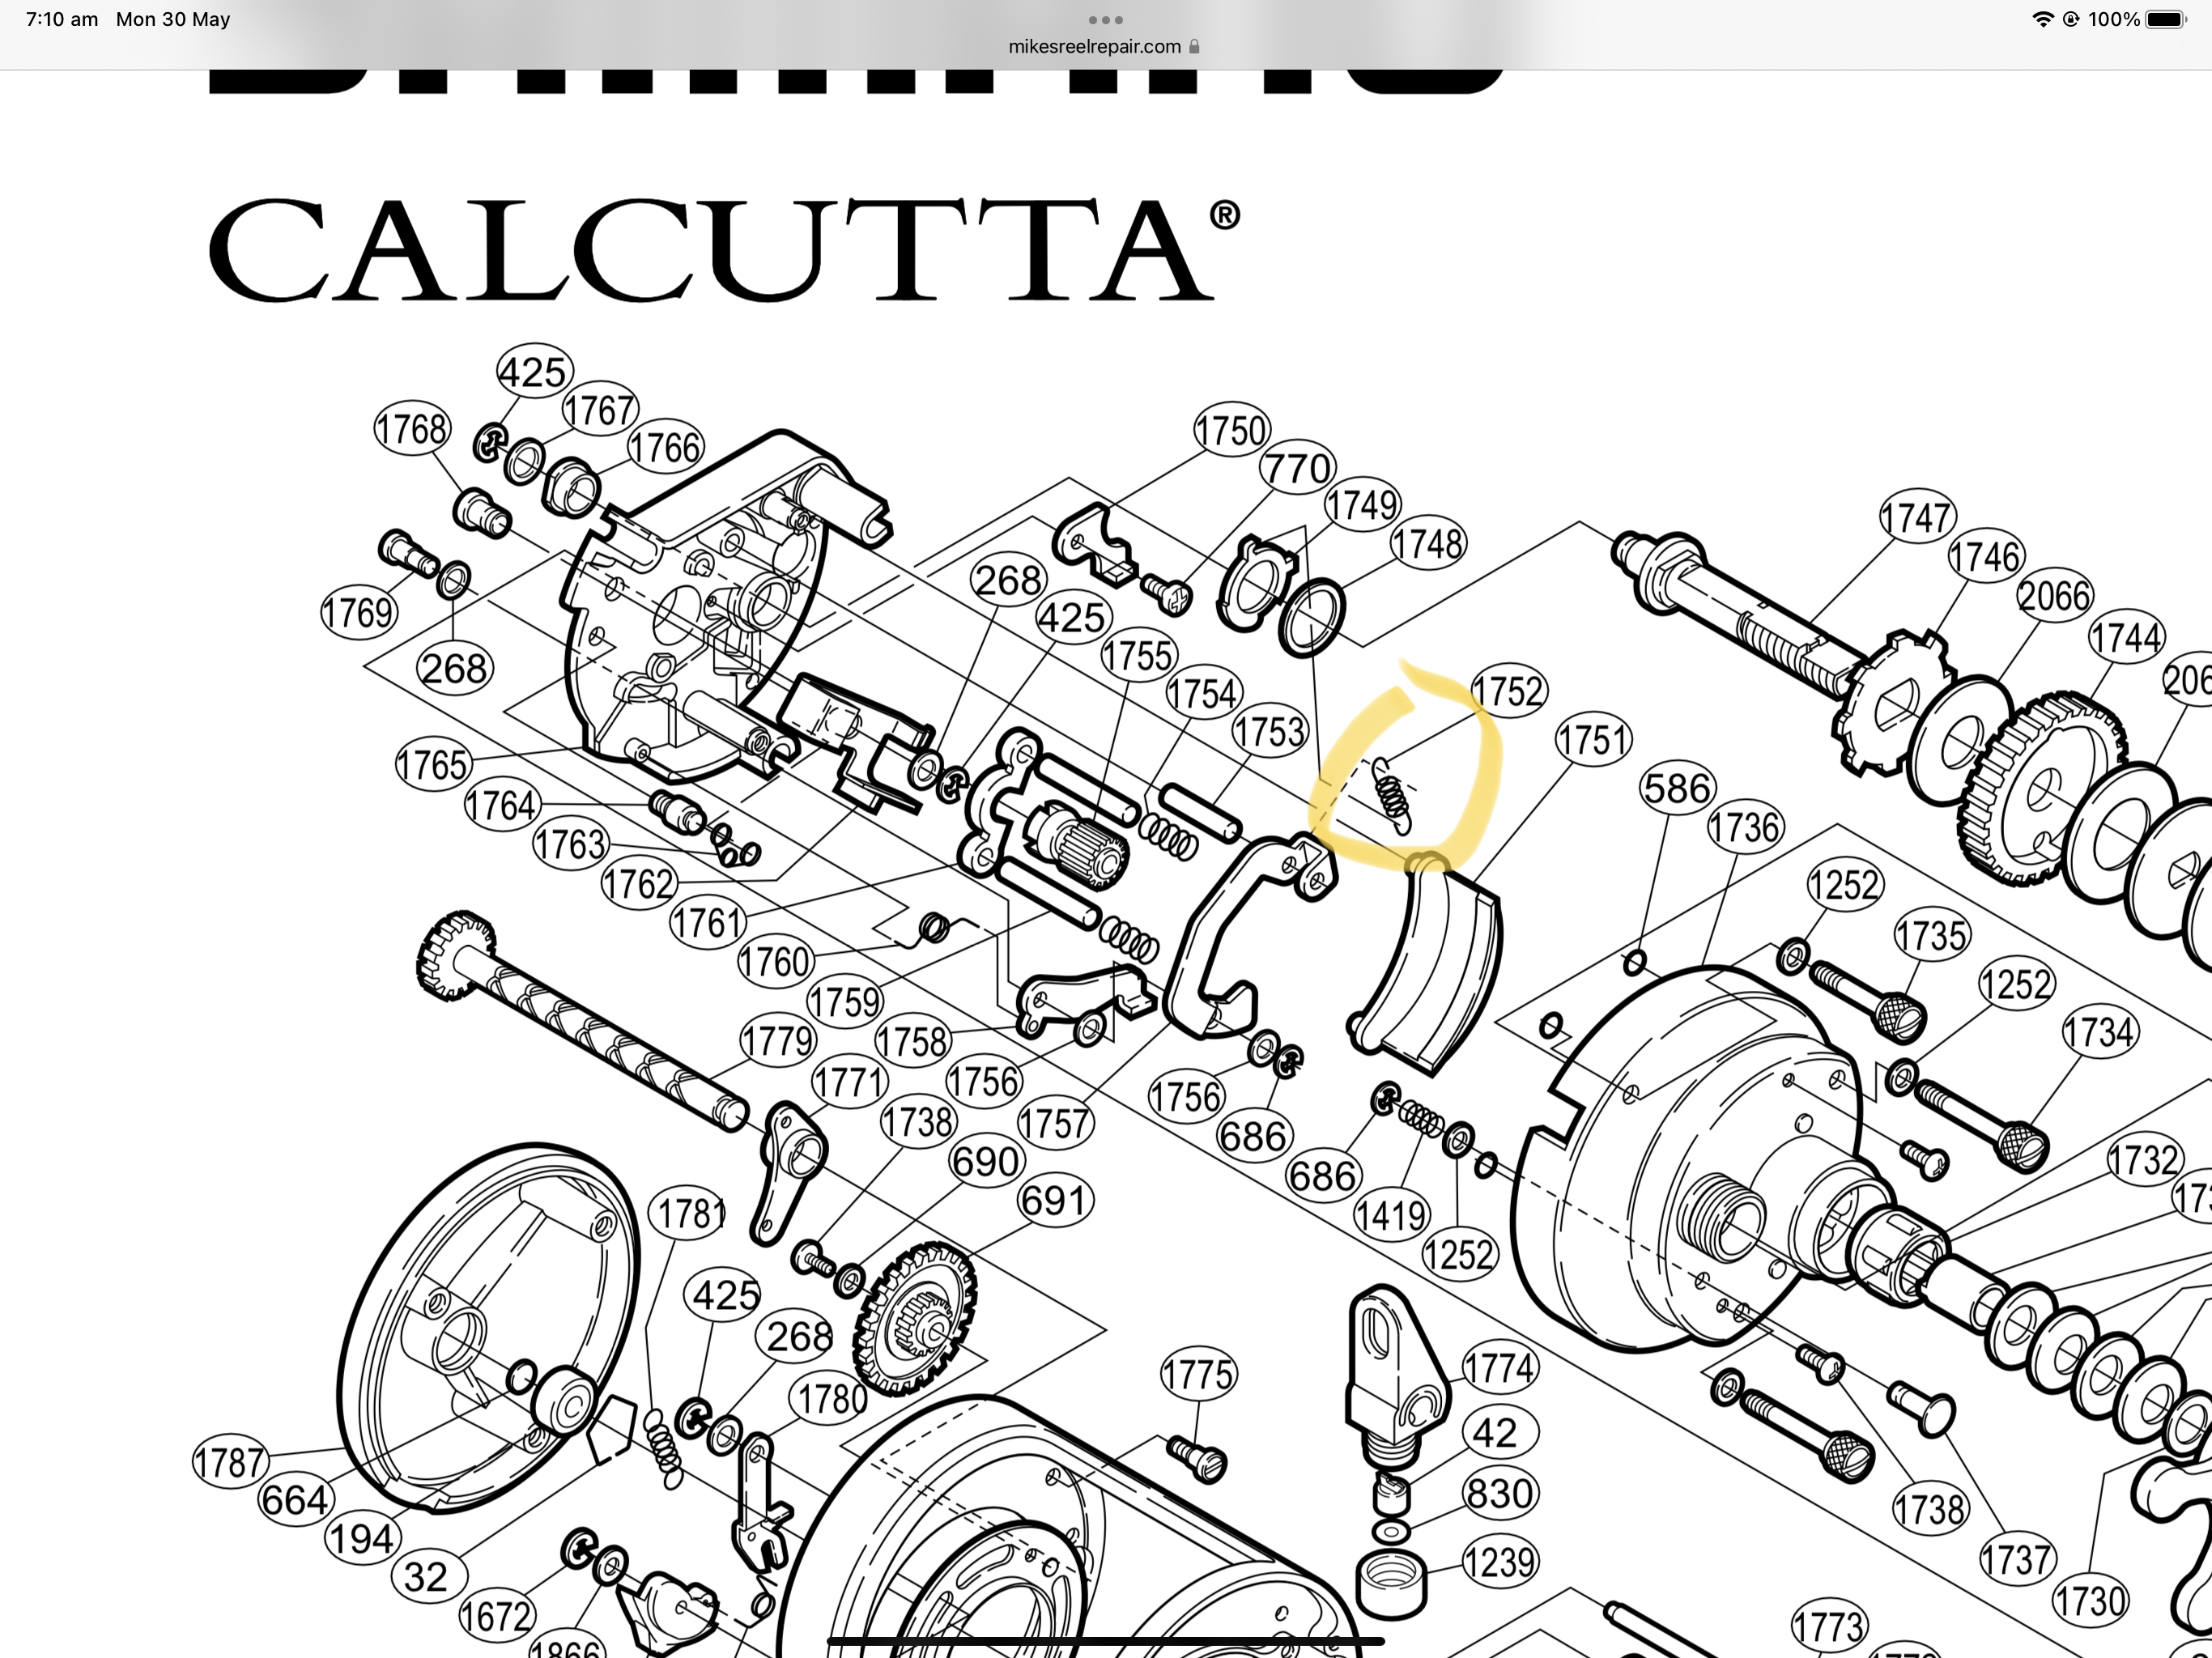 Anyone with a Calcutta 700 - clutch retraction spring